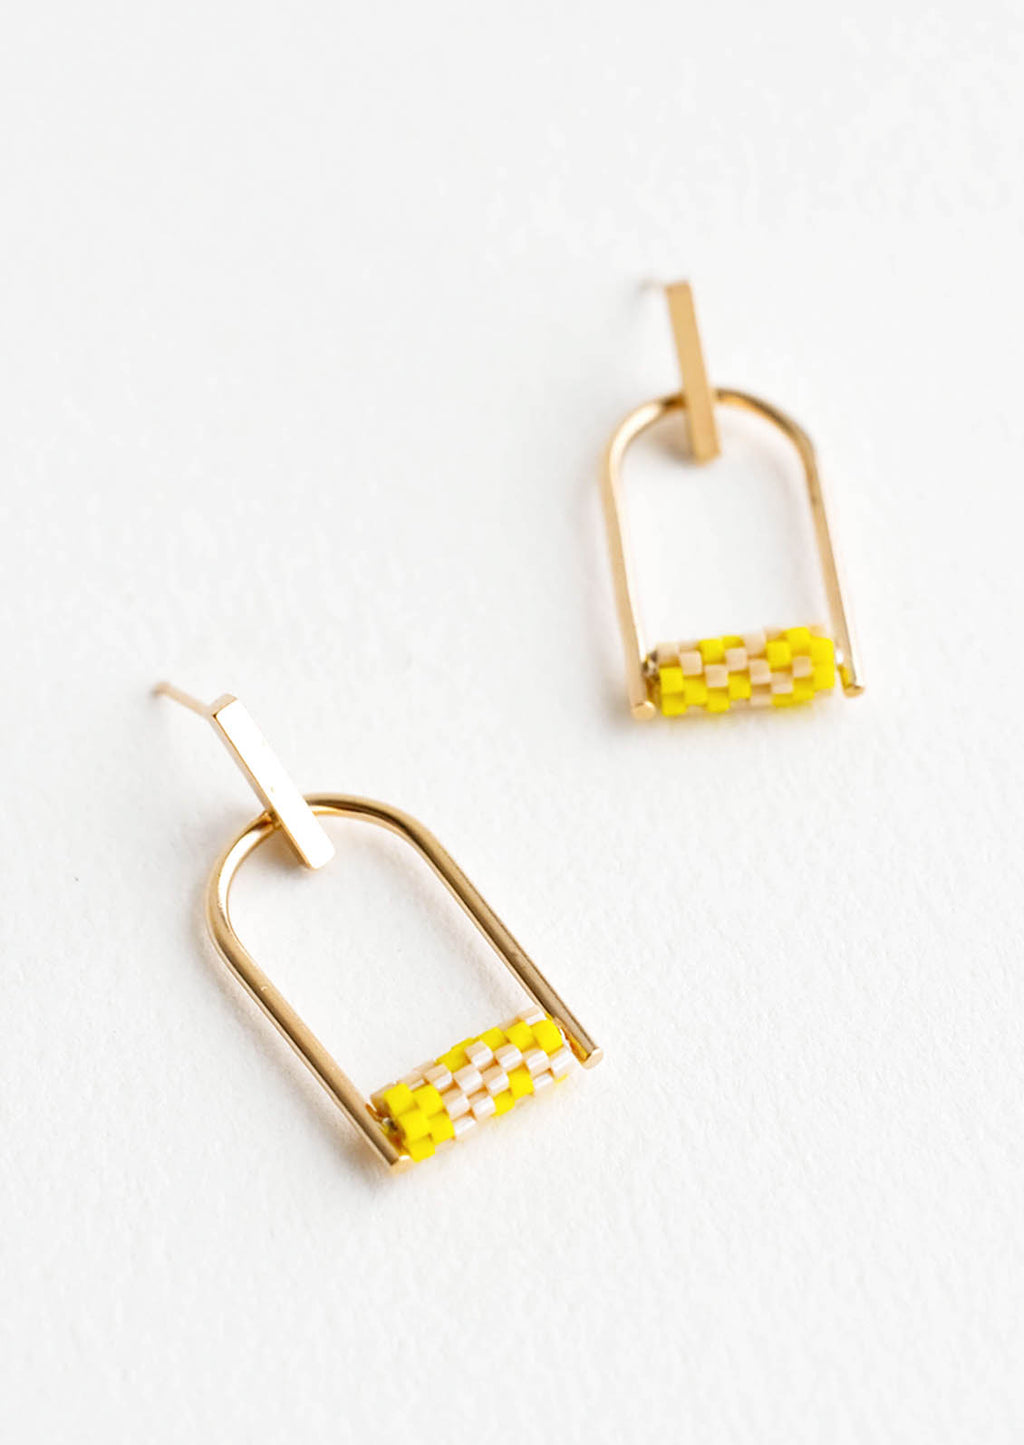 2: Arced gold post back earrings with yellow beads closing off the arc.